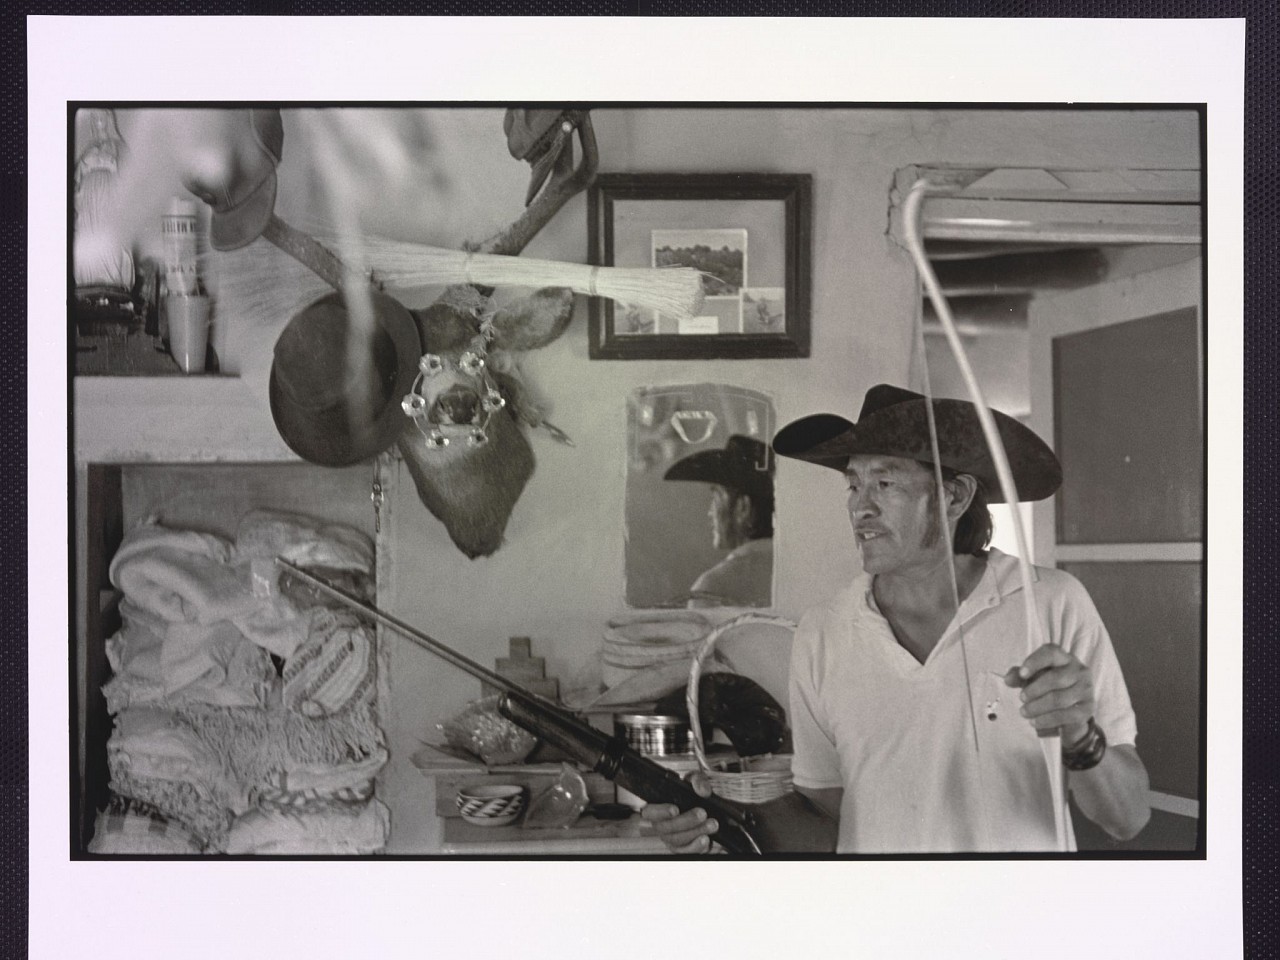 Danny LYON, Alamo Zucal Sanchez in his mother's home on the Santa Ana Reservation, New Mexico, 1970
Later gelatin silver print, 11 x 14 in.
2016.07.004
ADDITIONAL INFORMATION: Illustrated: Danny Lyon, The Seventh Dog (New York, The Phaidon Press, 2014), p. 79
Credit Line: Lafayette College Art Collection, Easton, PA; Gift of Bennett ('79) and Meg Goodman